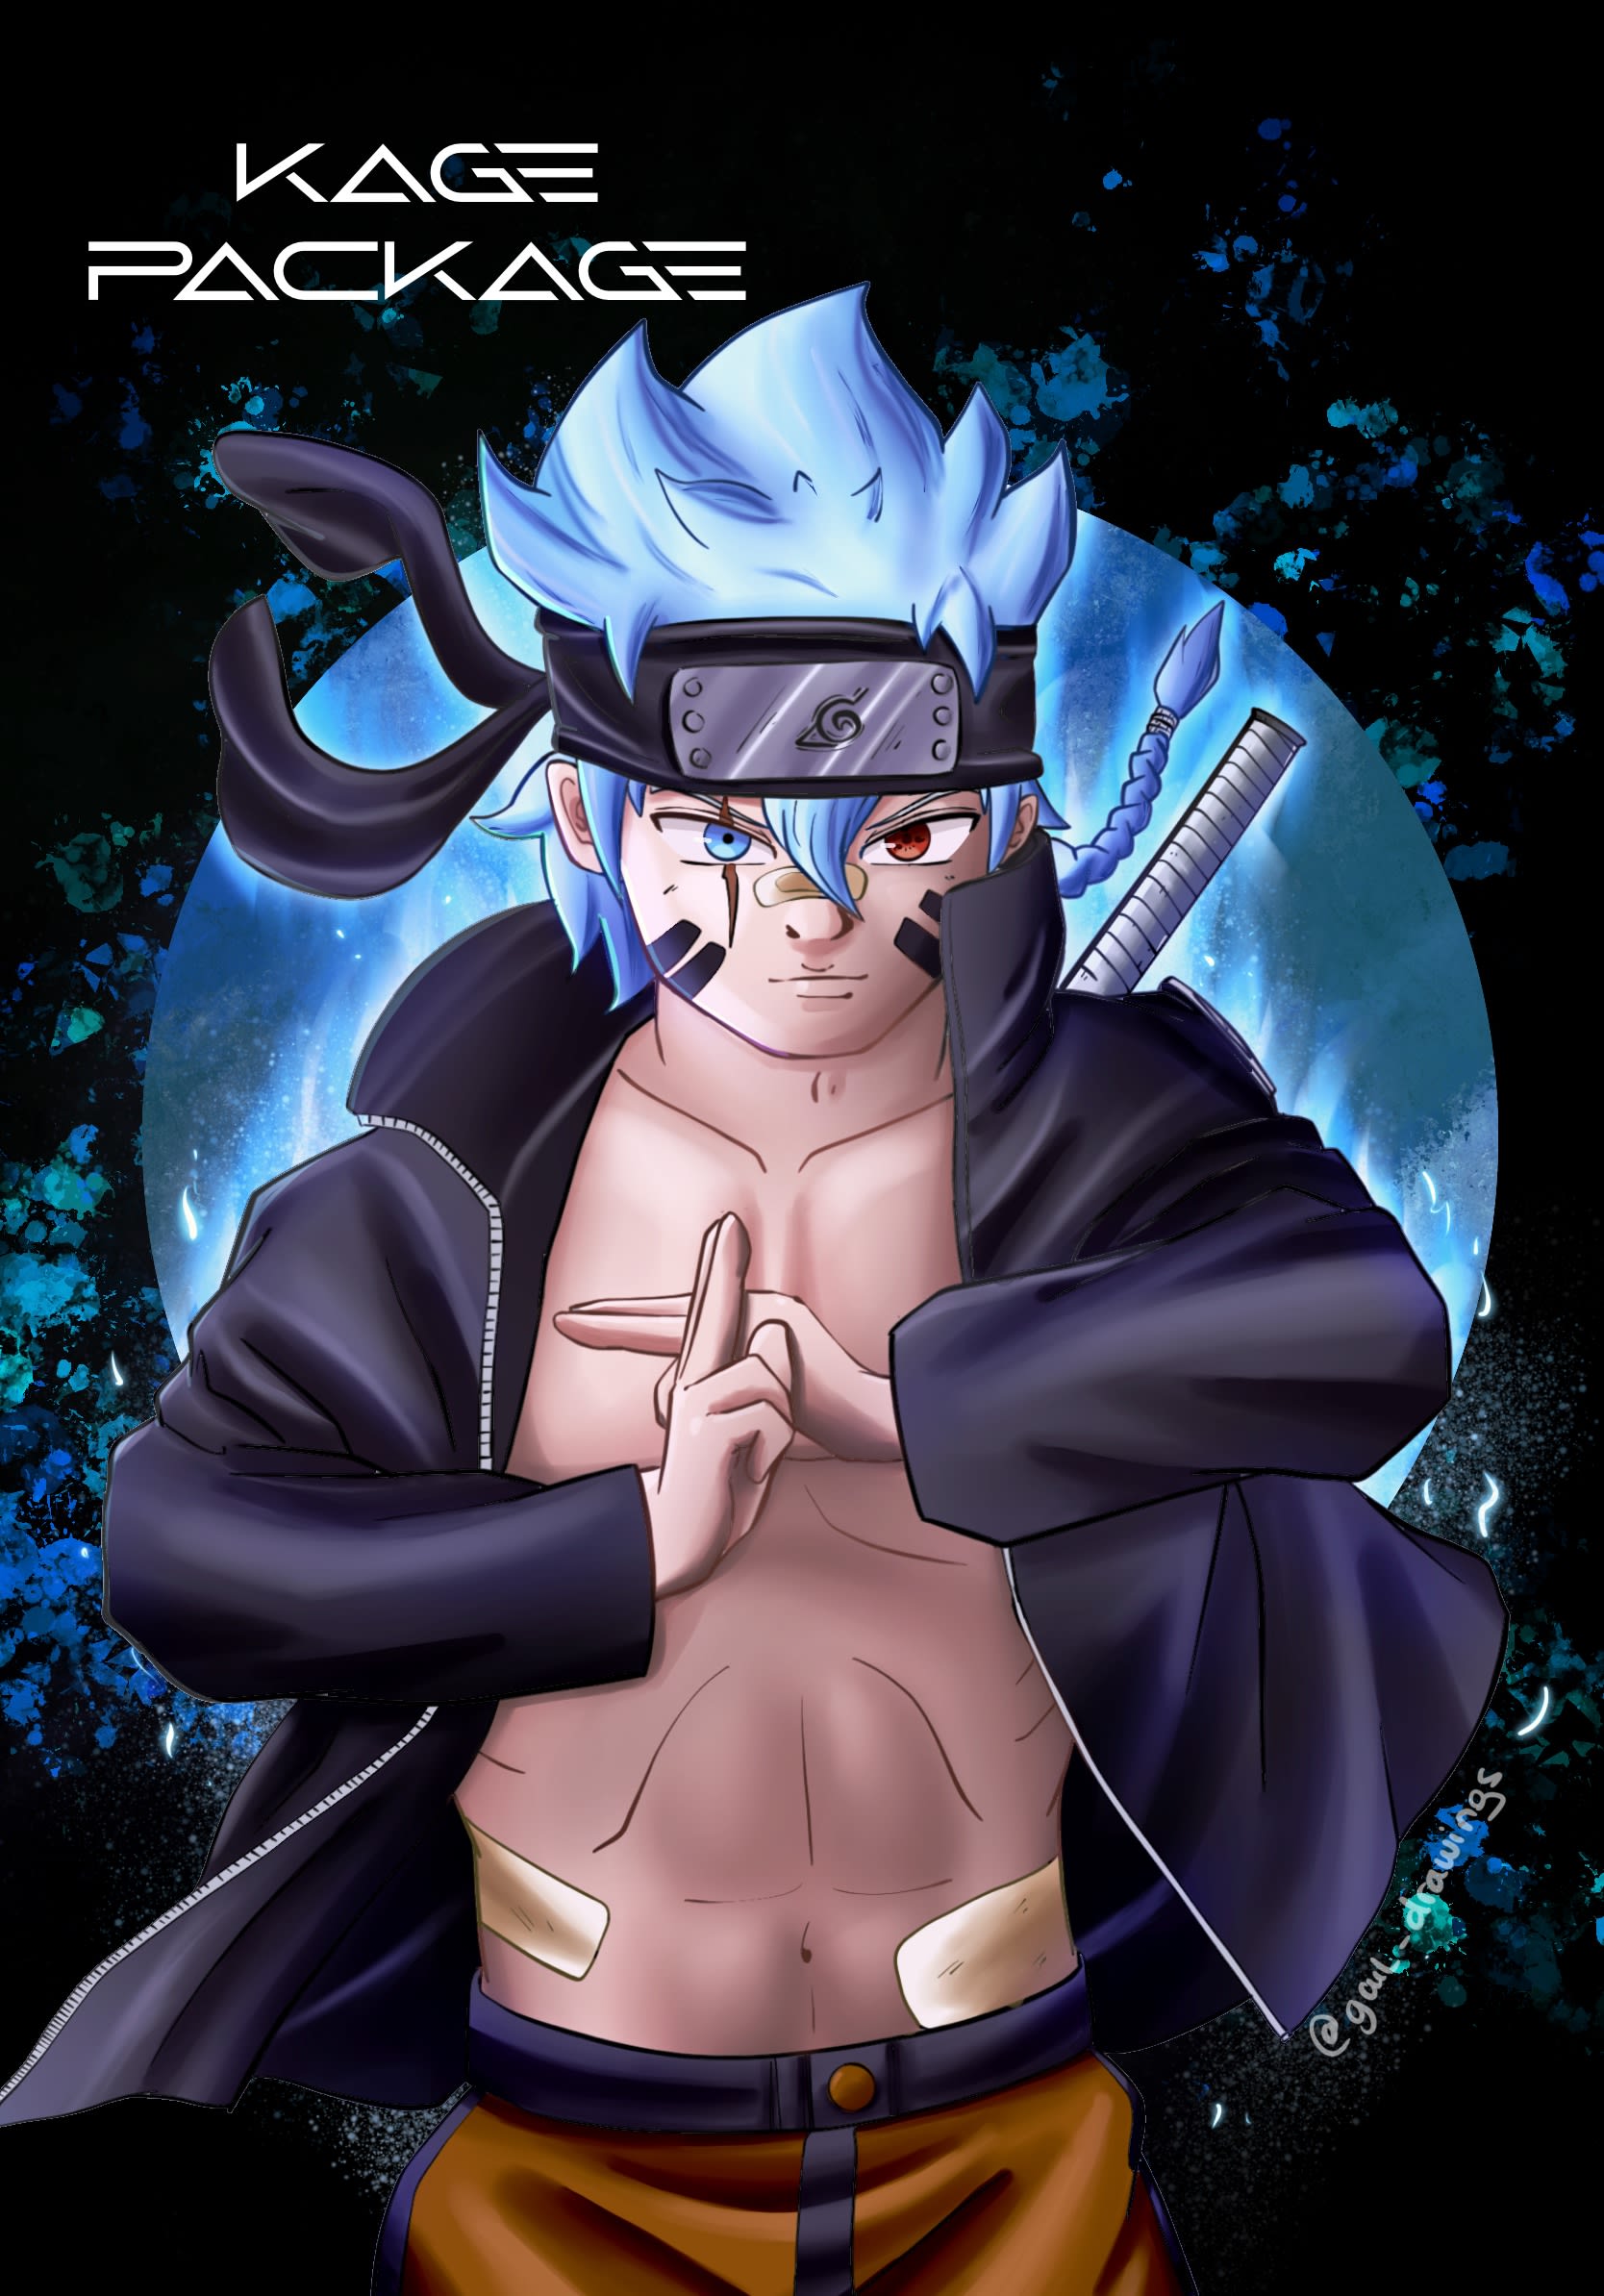 I drew Naruto dressed as a jounin for a commission! : r/Boruto